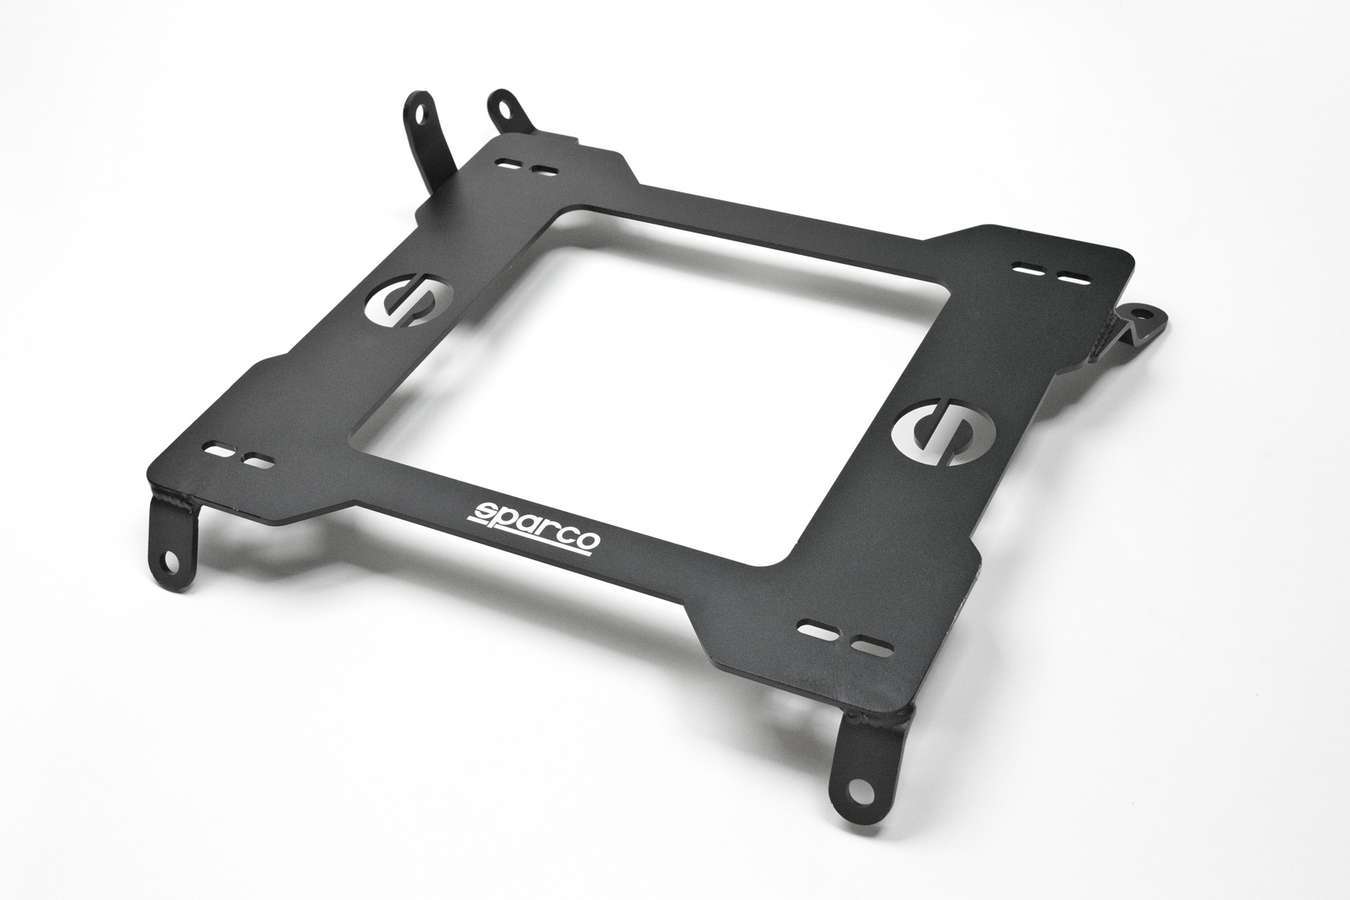 Sparco 600SB039R - Seat Adapter Bracket, 600 Series, Sparco to Passenger Side, Steel, Black Powder Coat, Ford Mustang 2005-14, Each